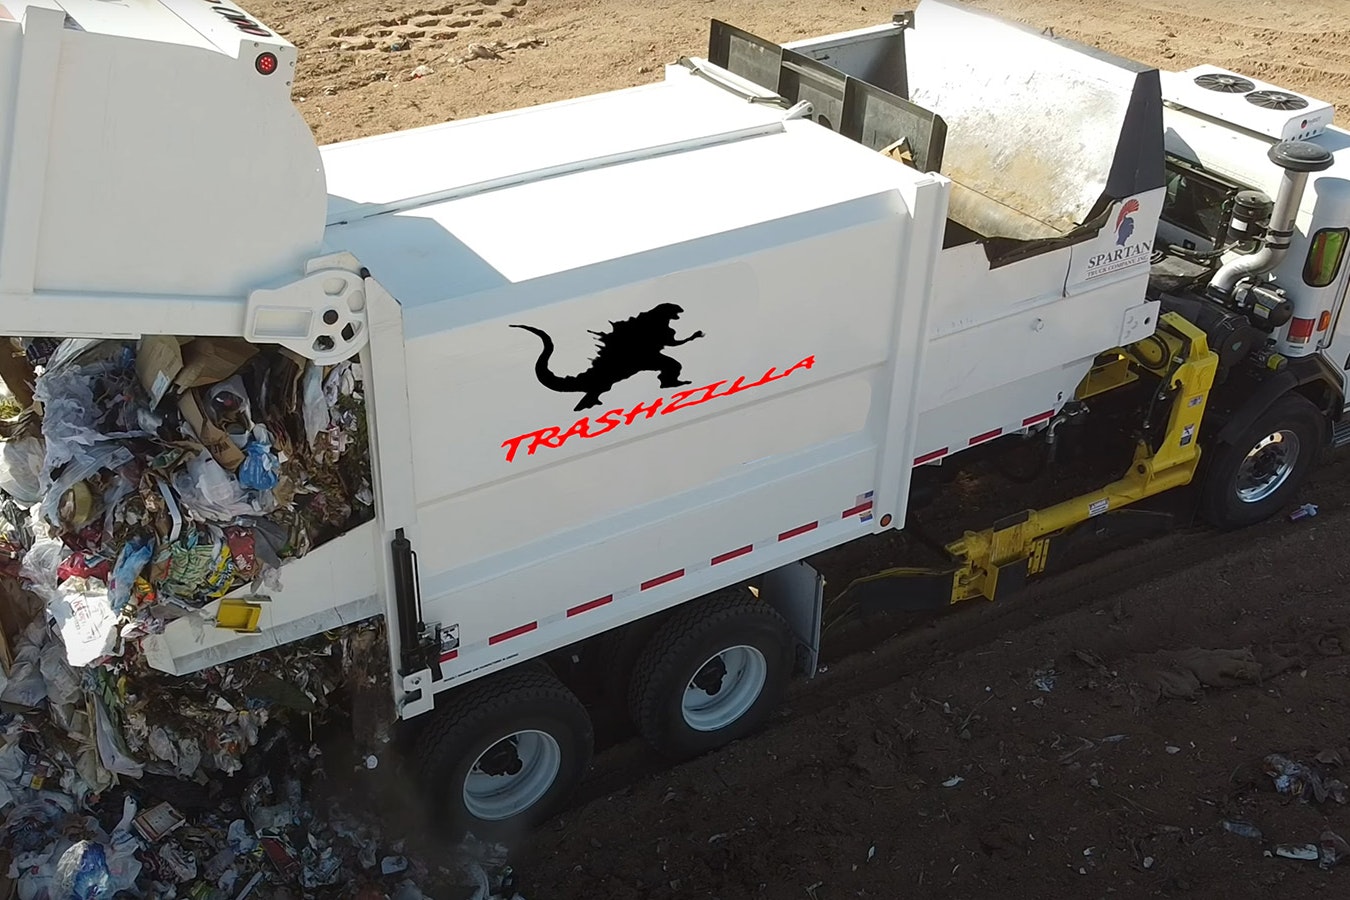 Students at Lakeview Elementary School in Gillette came up with the name "Trashzilla" for one of the city's garbage trucks.